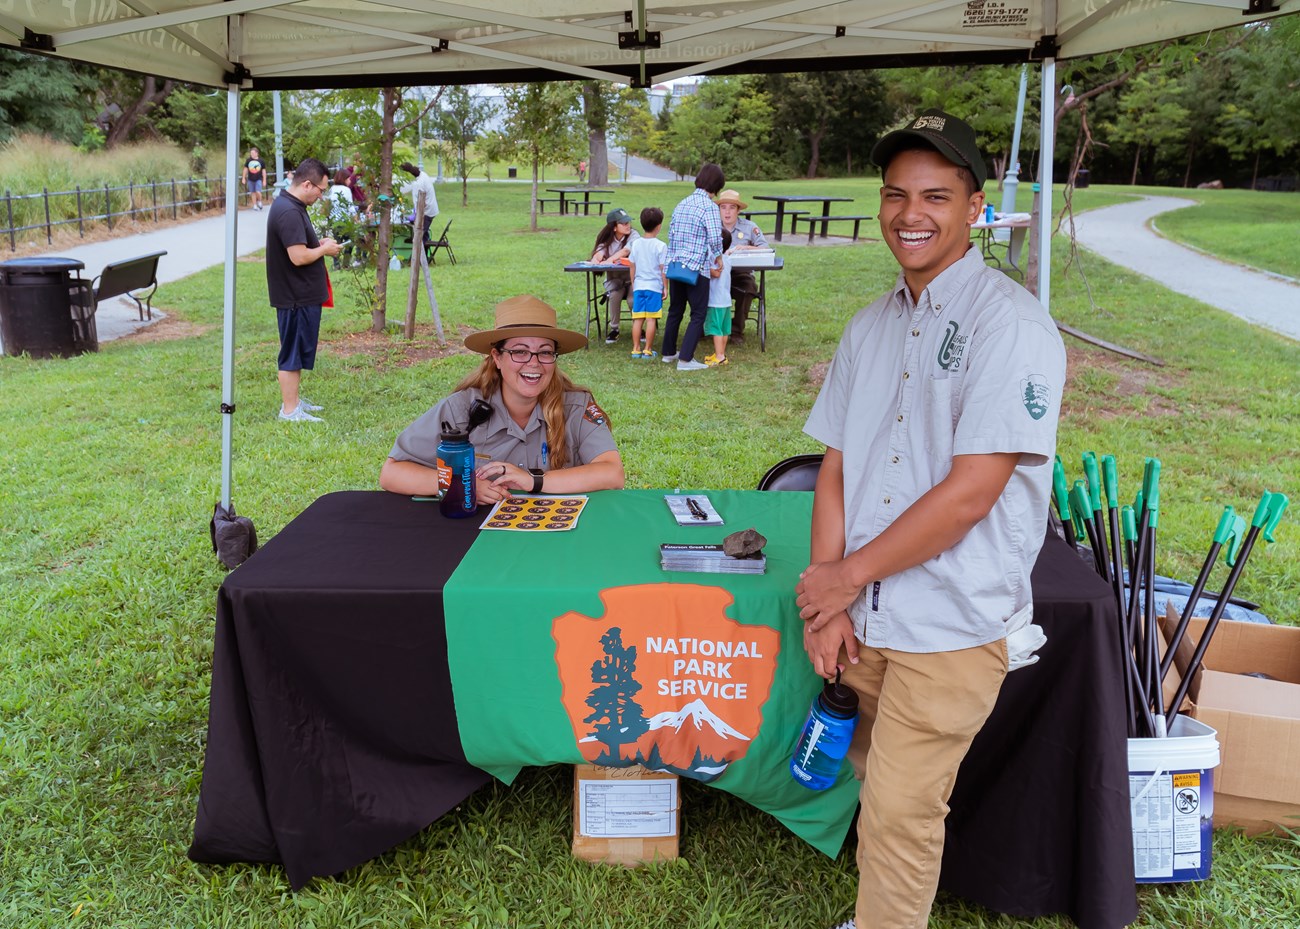 A seated park ranger in grey & green uniform with flat hat smiles at a table under a tent as a young man in a Great Falls Youth Corps shirt & hat smiles beside her